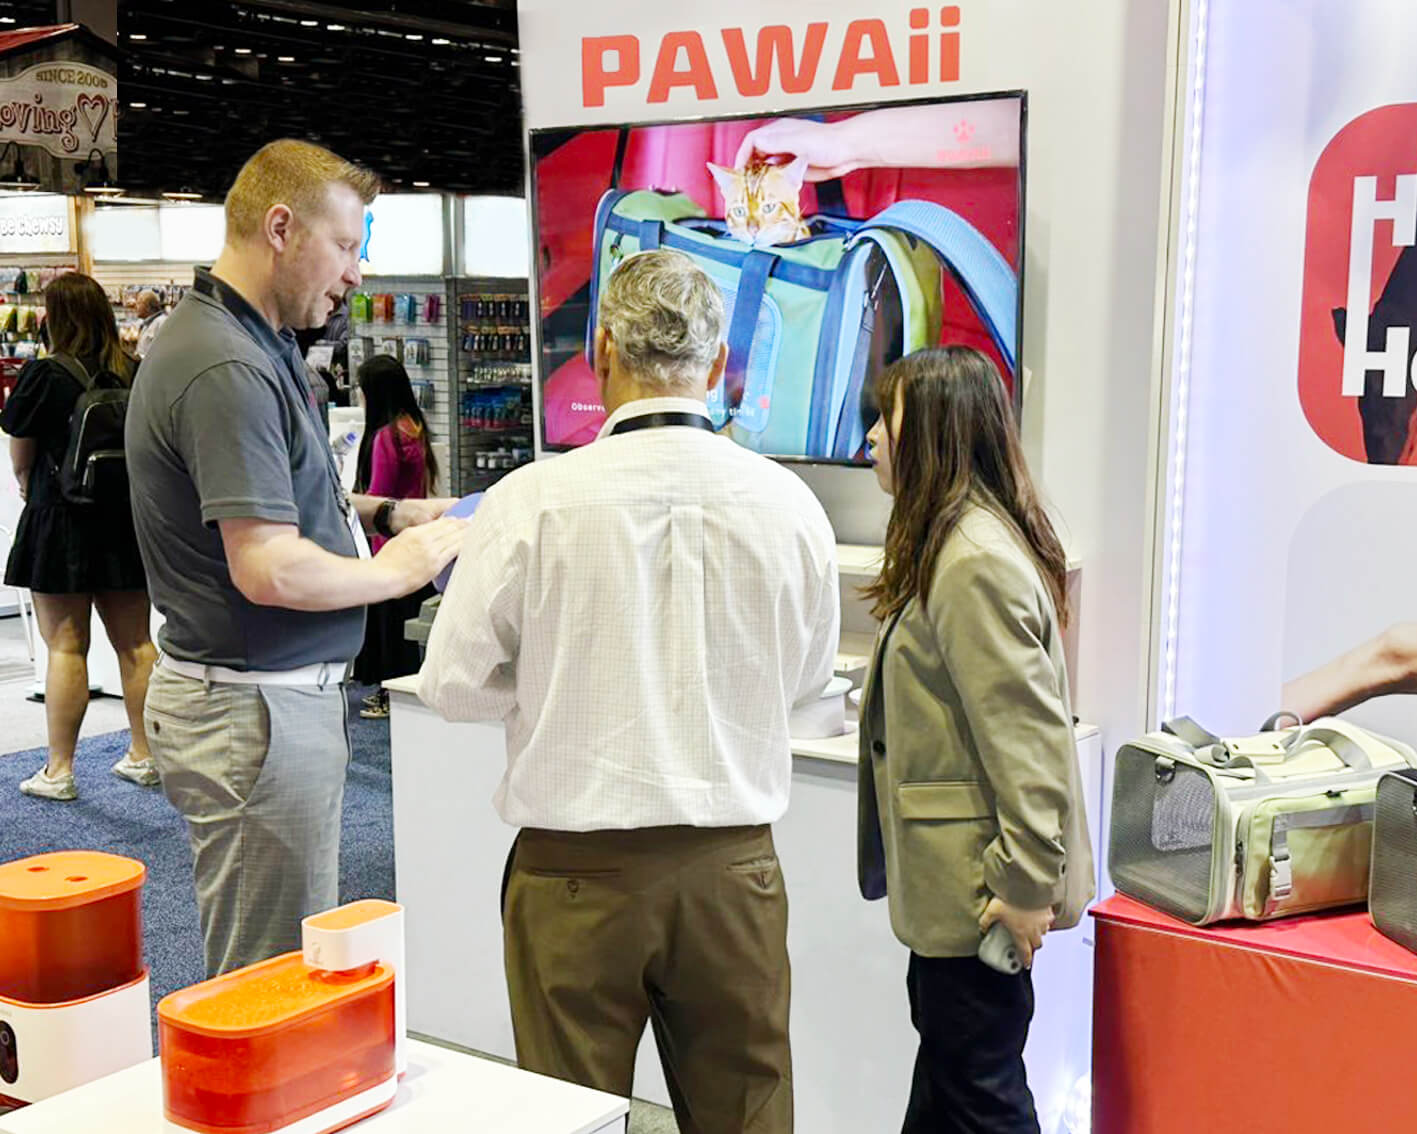 exhibition visitors showing great interest in PAWAii